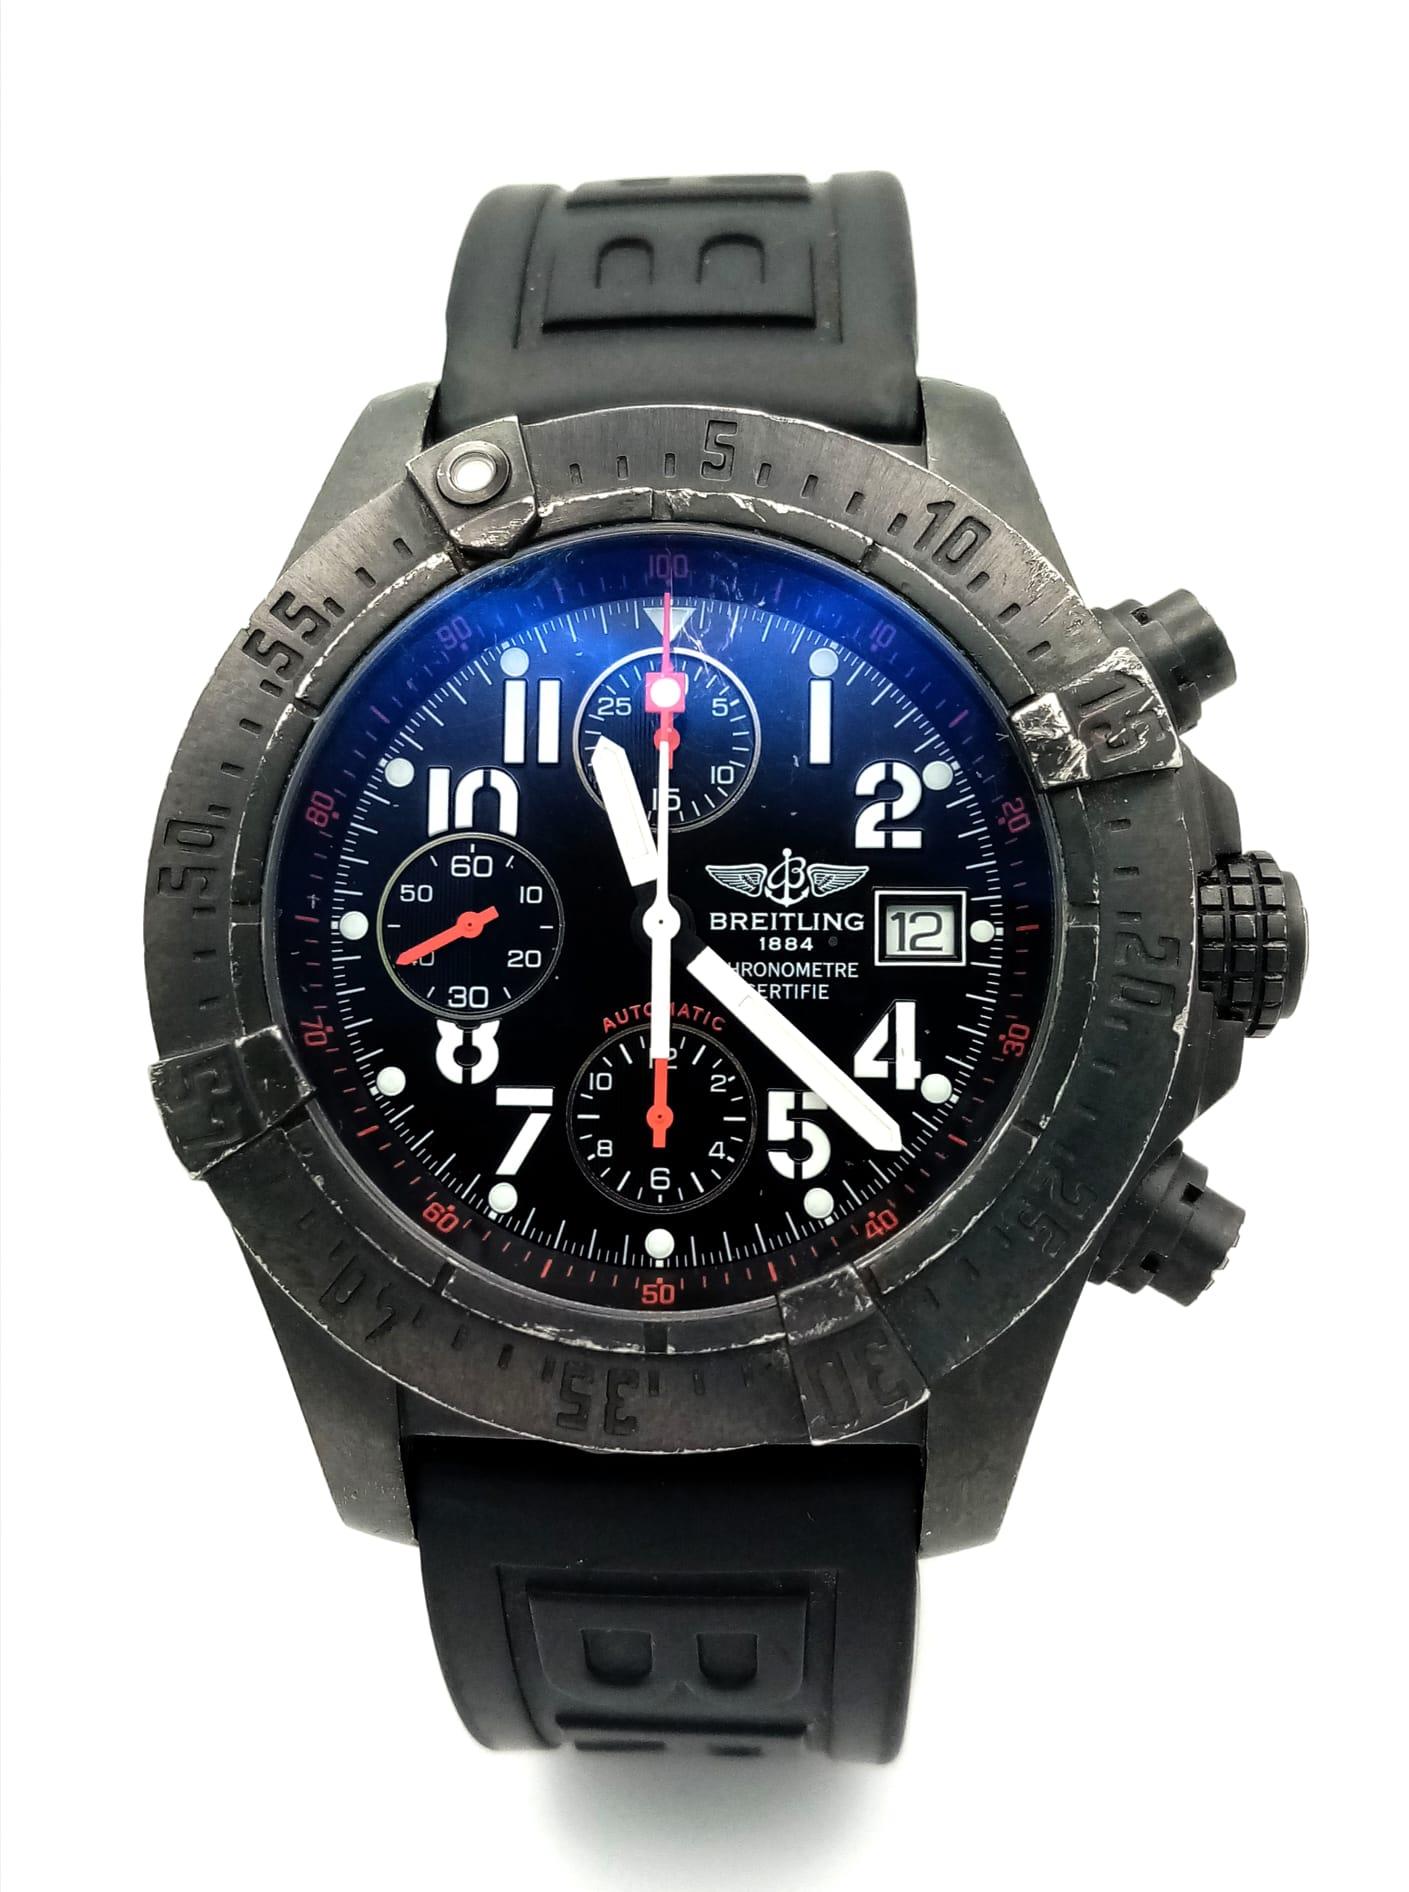 A Breitling Limited Edition (740/2000) Automatic Chronograph Gents Watch. Black rubber strap. - Image 3 of 13